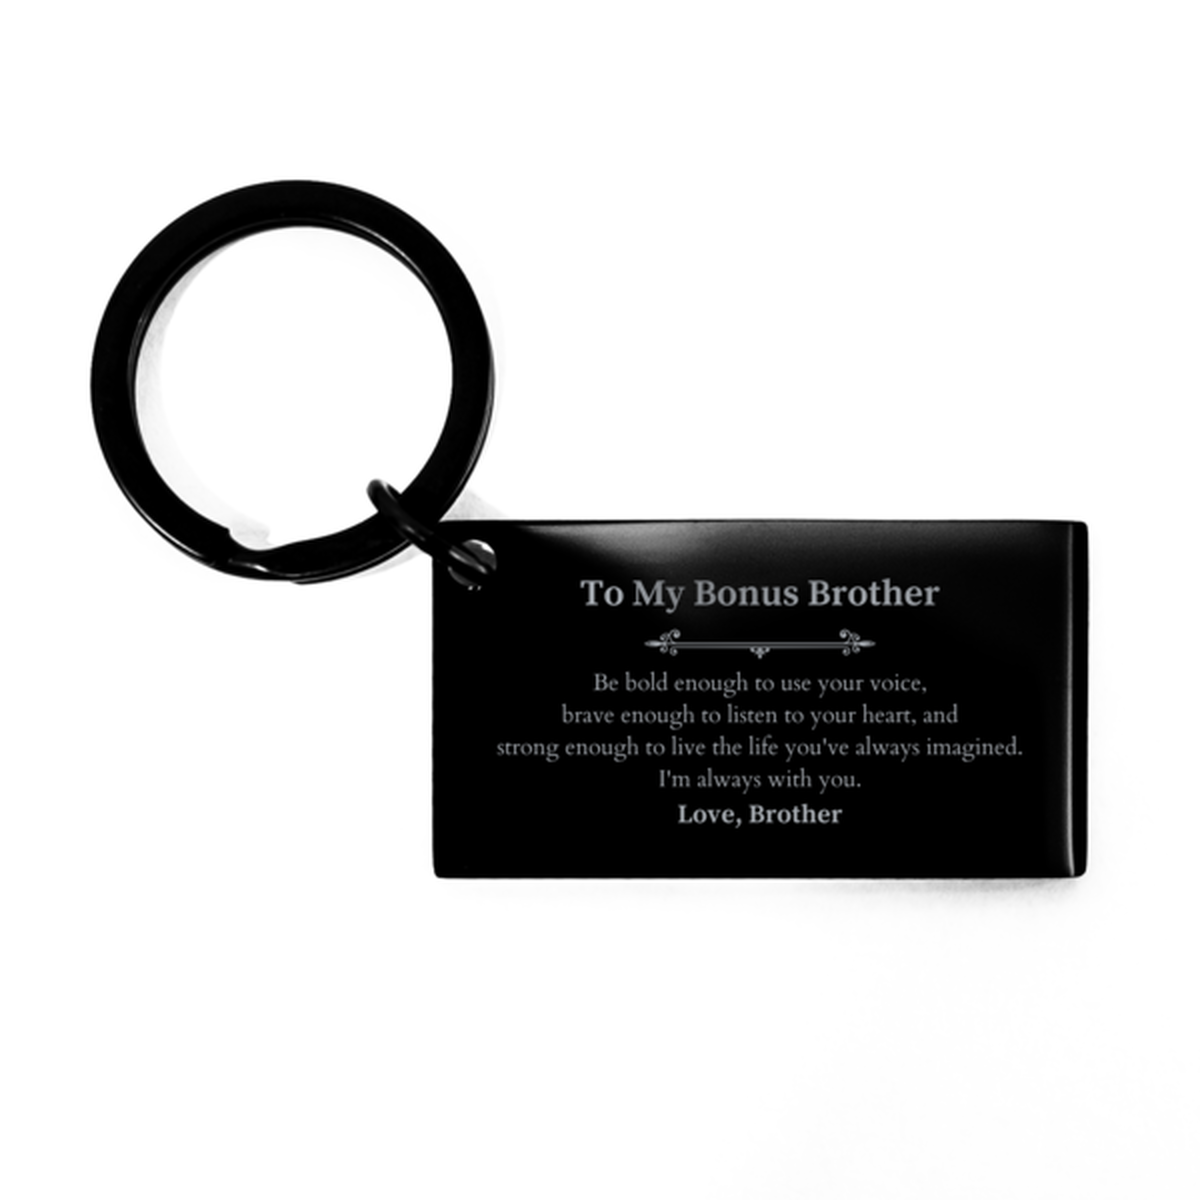 Keepsake Bonus Brother Keychain Gift Idea Graduation Christmas Birthday Bonus Brother from Brother, Bonus Brother Be bold enough to use your voice, brave enough to listen to your heart. Love, Brother